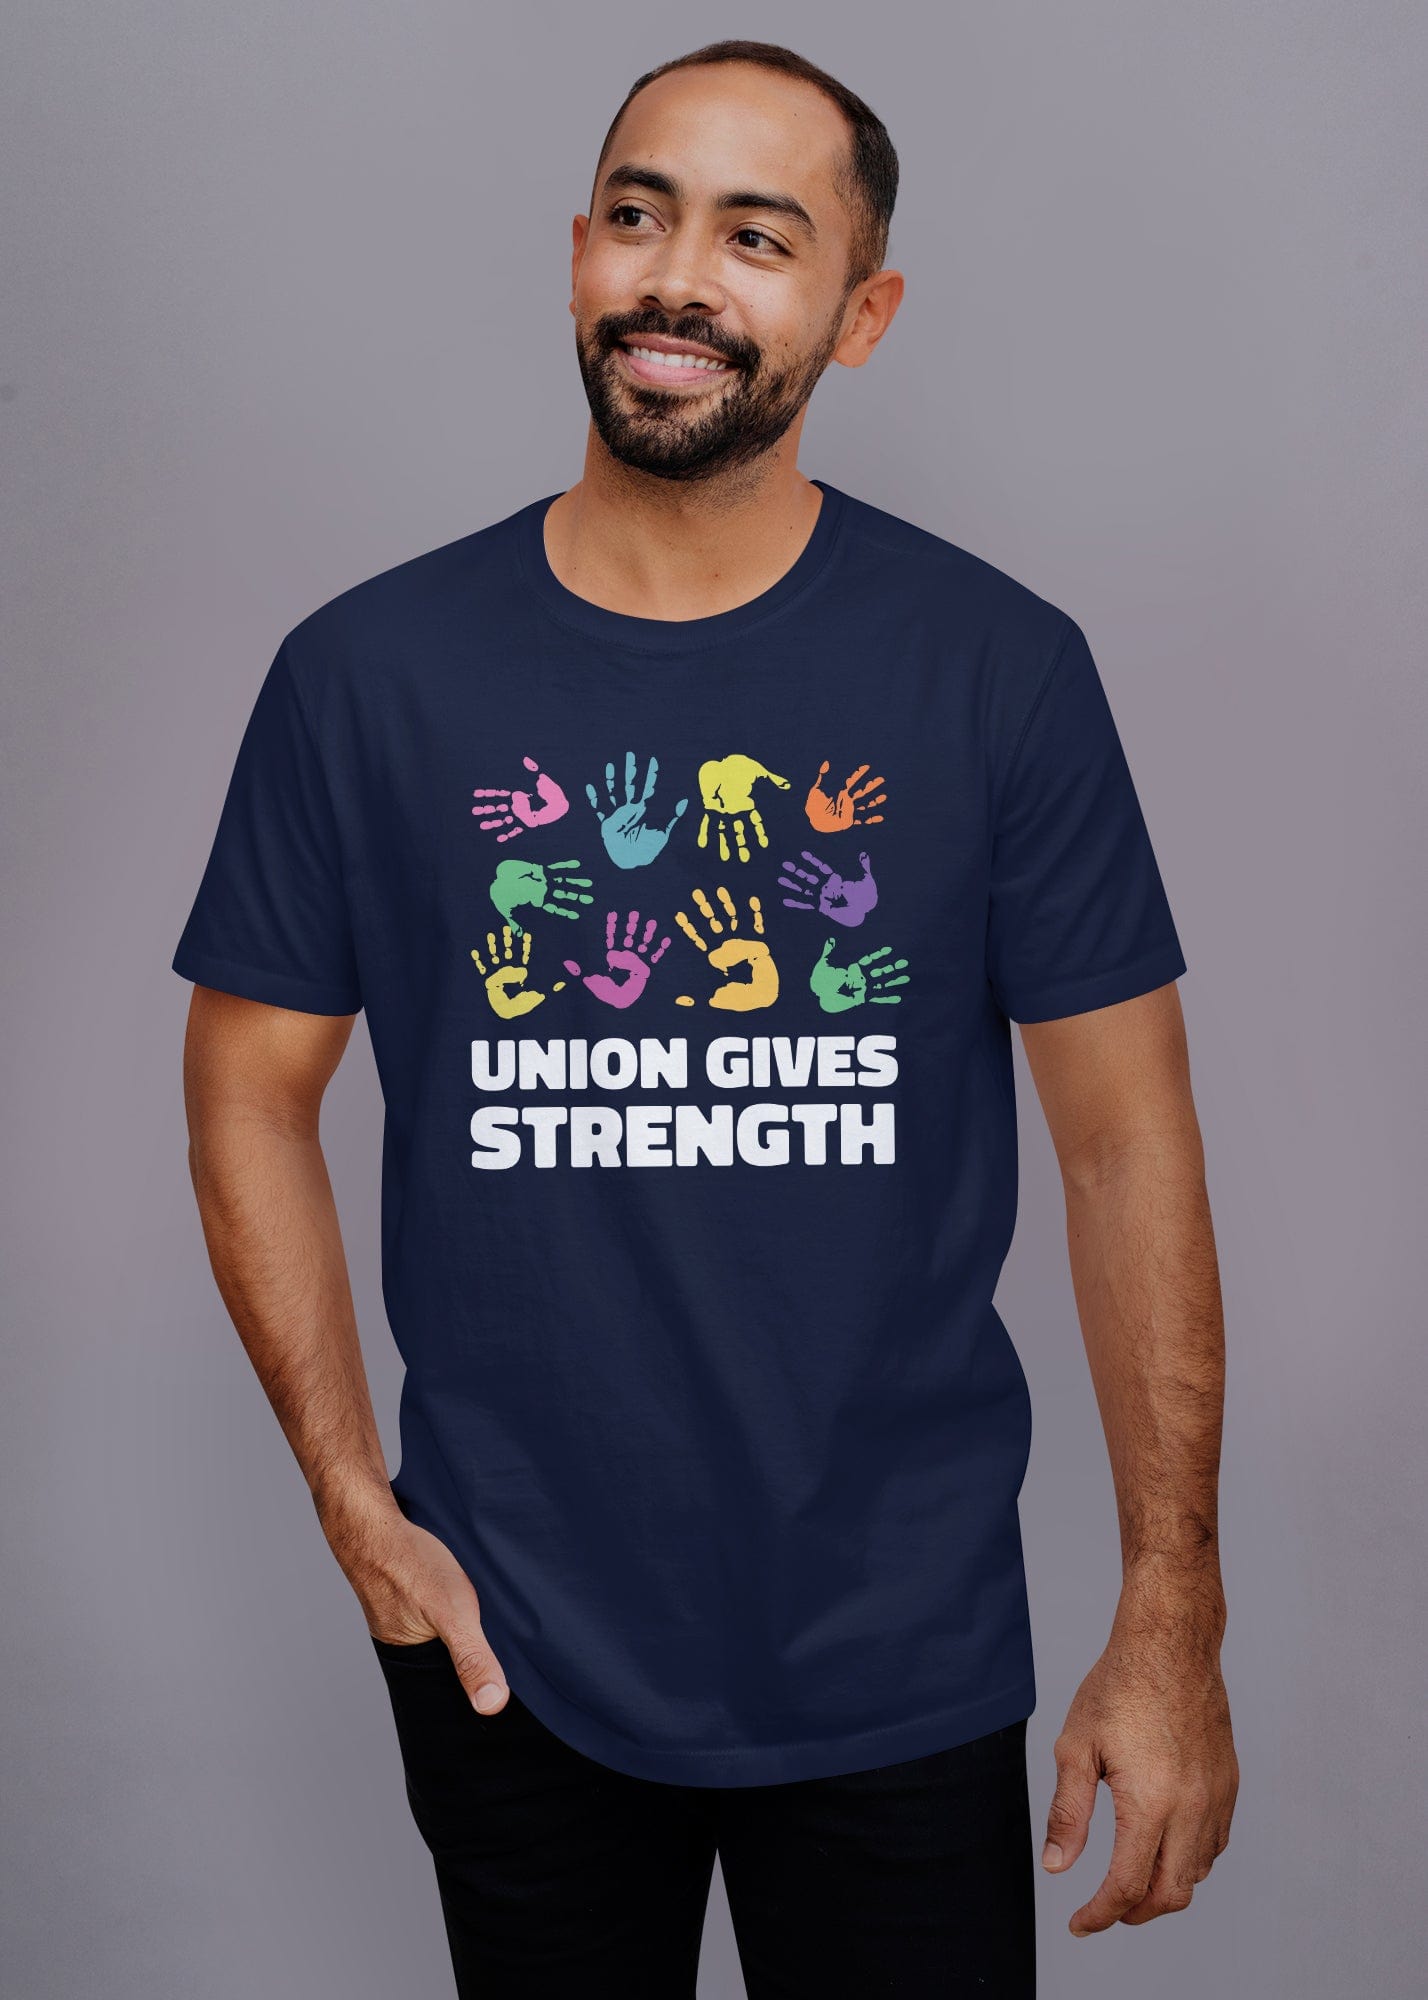 Union Gives Strength Printed Half Sleeve Premium Cotton T-shirt For Men